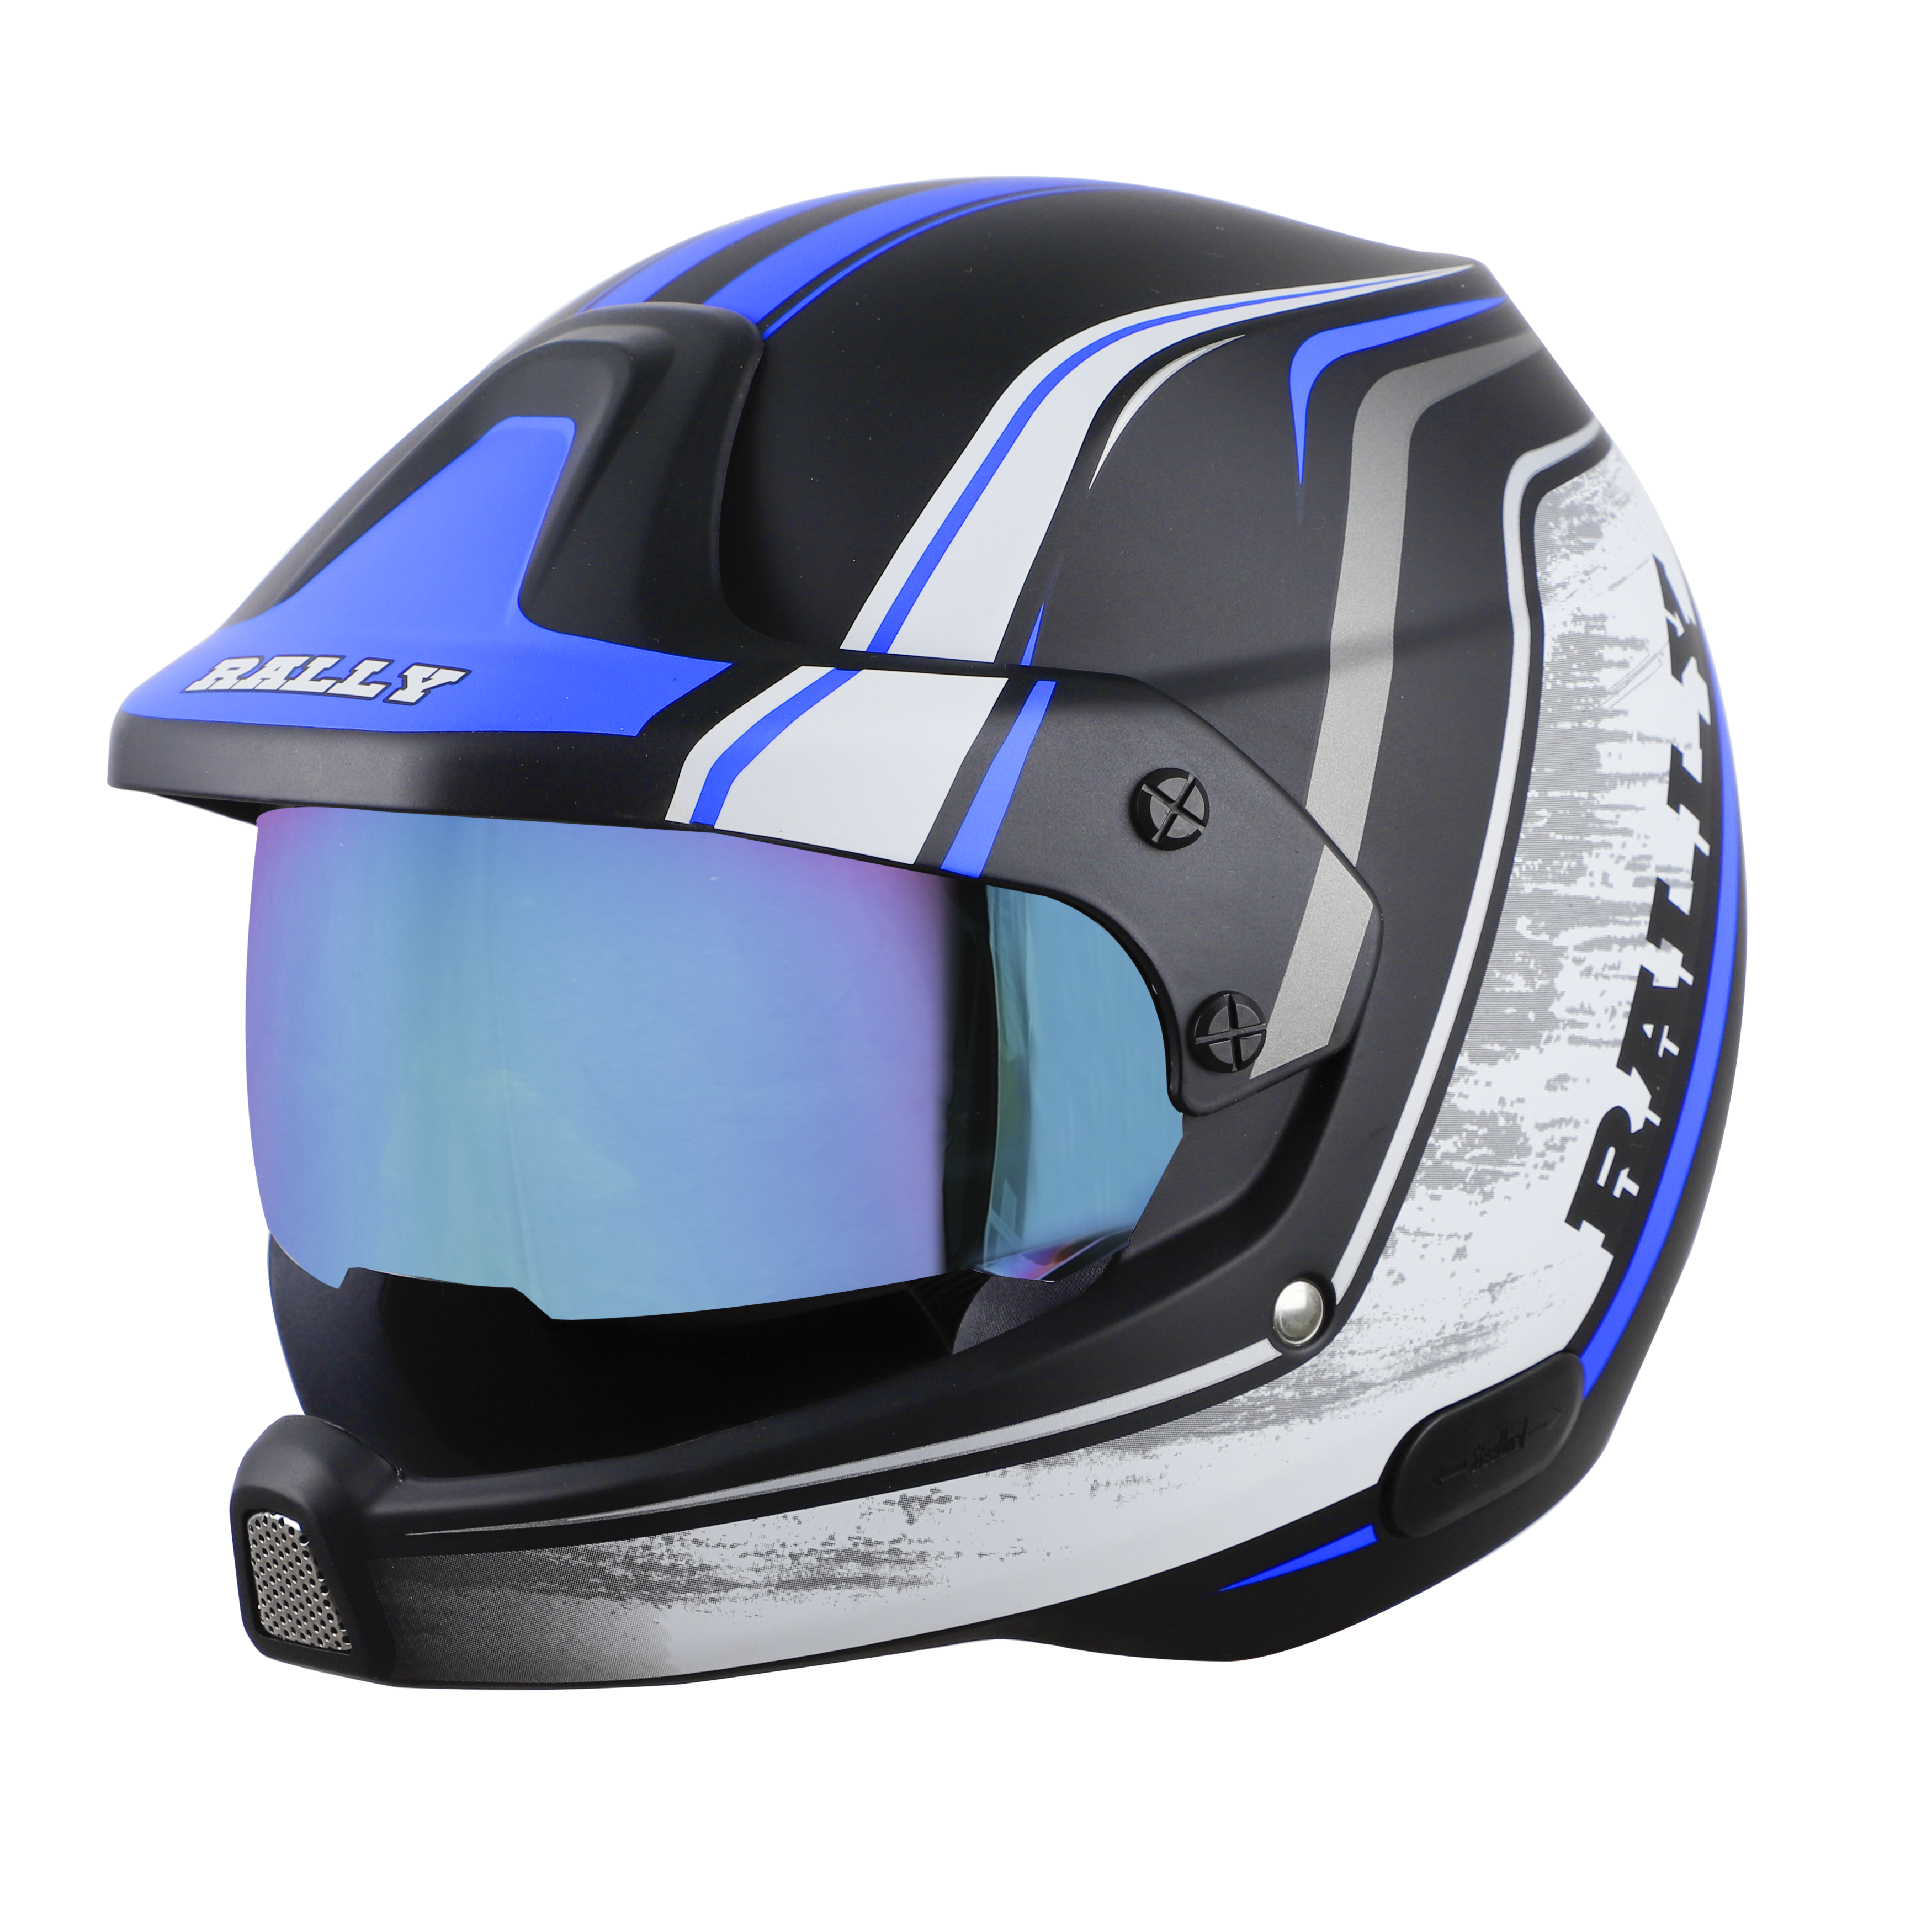 SB-51 RALLY RUT GLOSSY BLACK WITH BLUE ( FITTED WITH CLEAR VISOR EXTRA CHROME RAINBOW VISOR FREE)